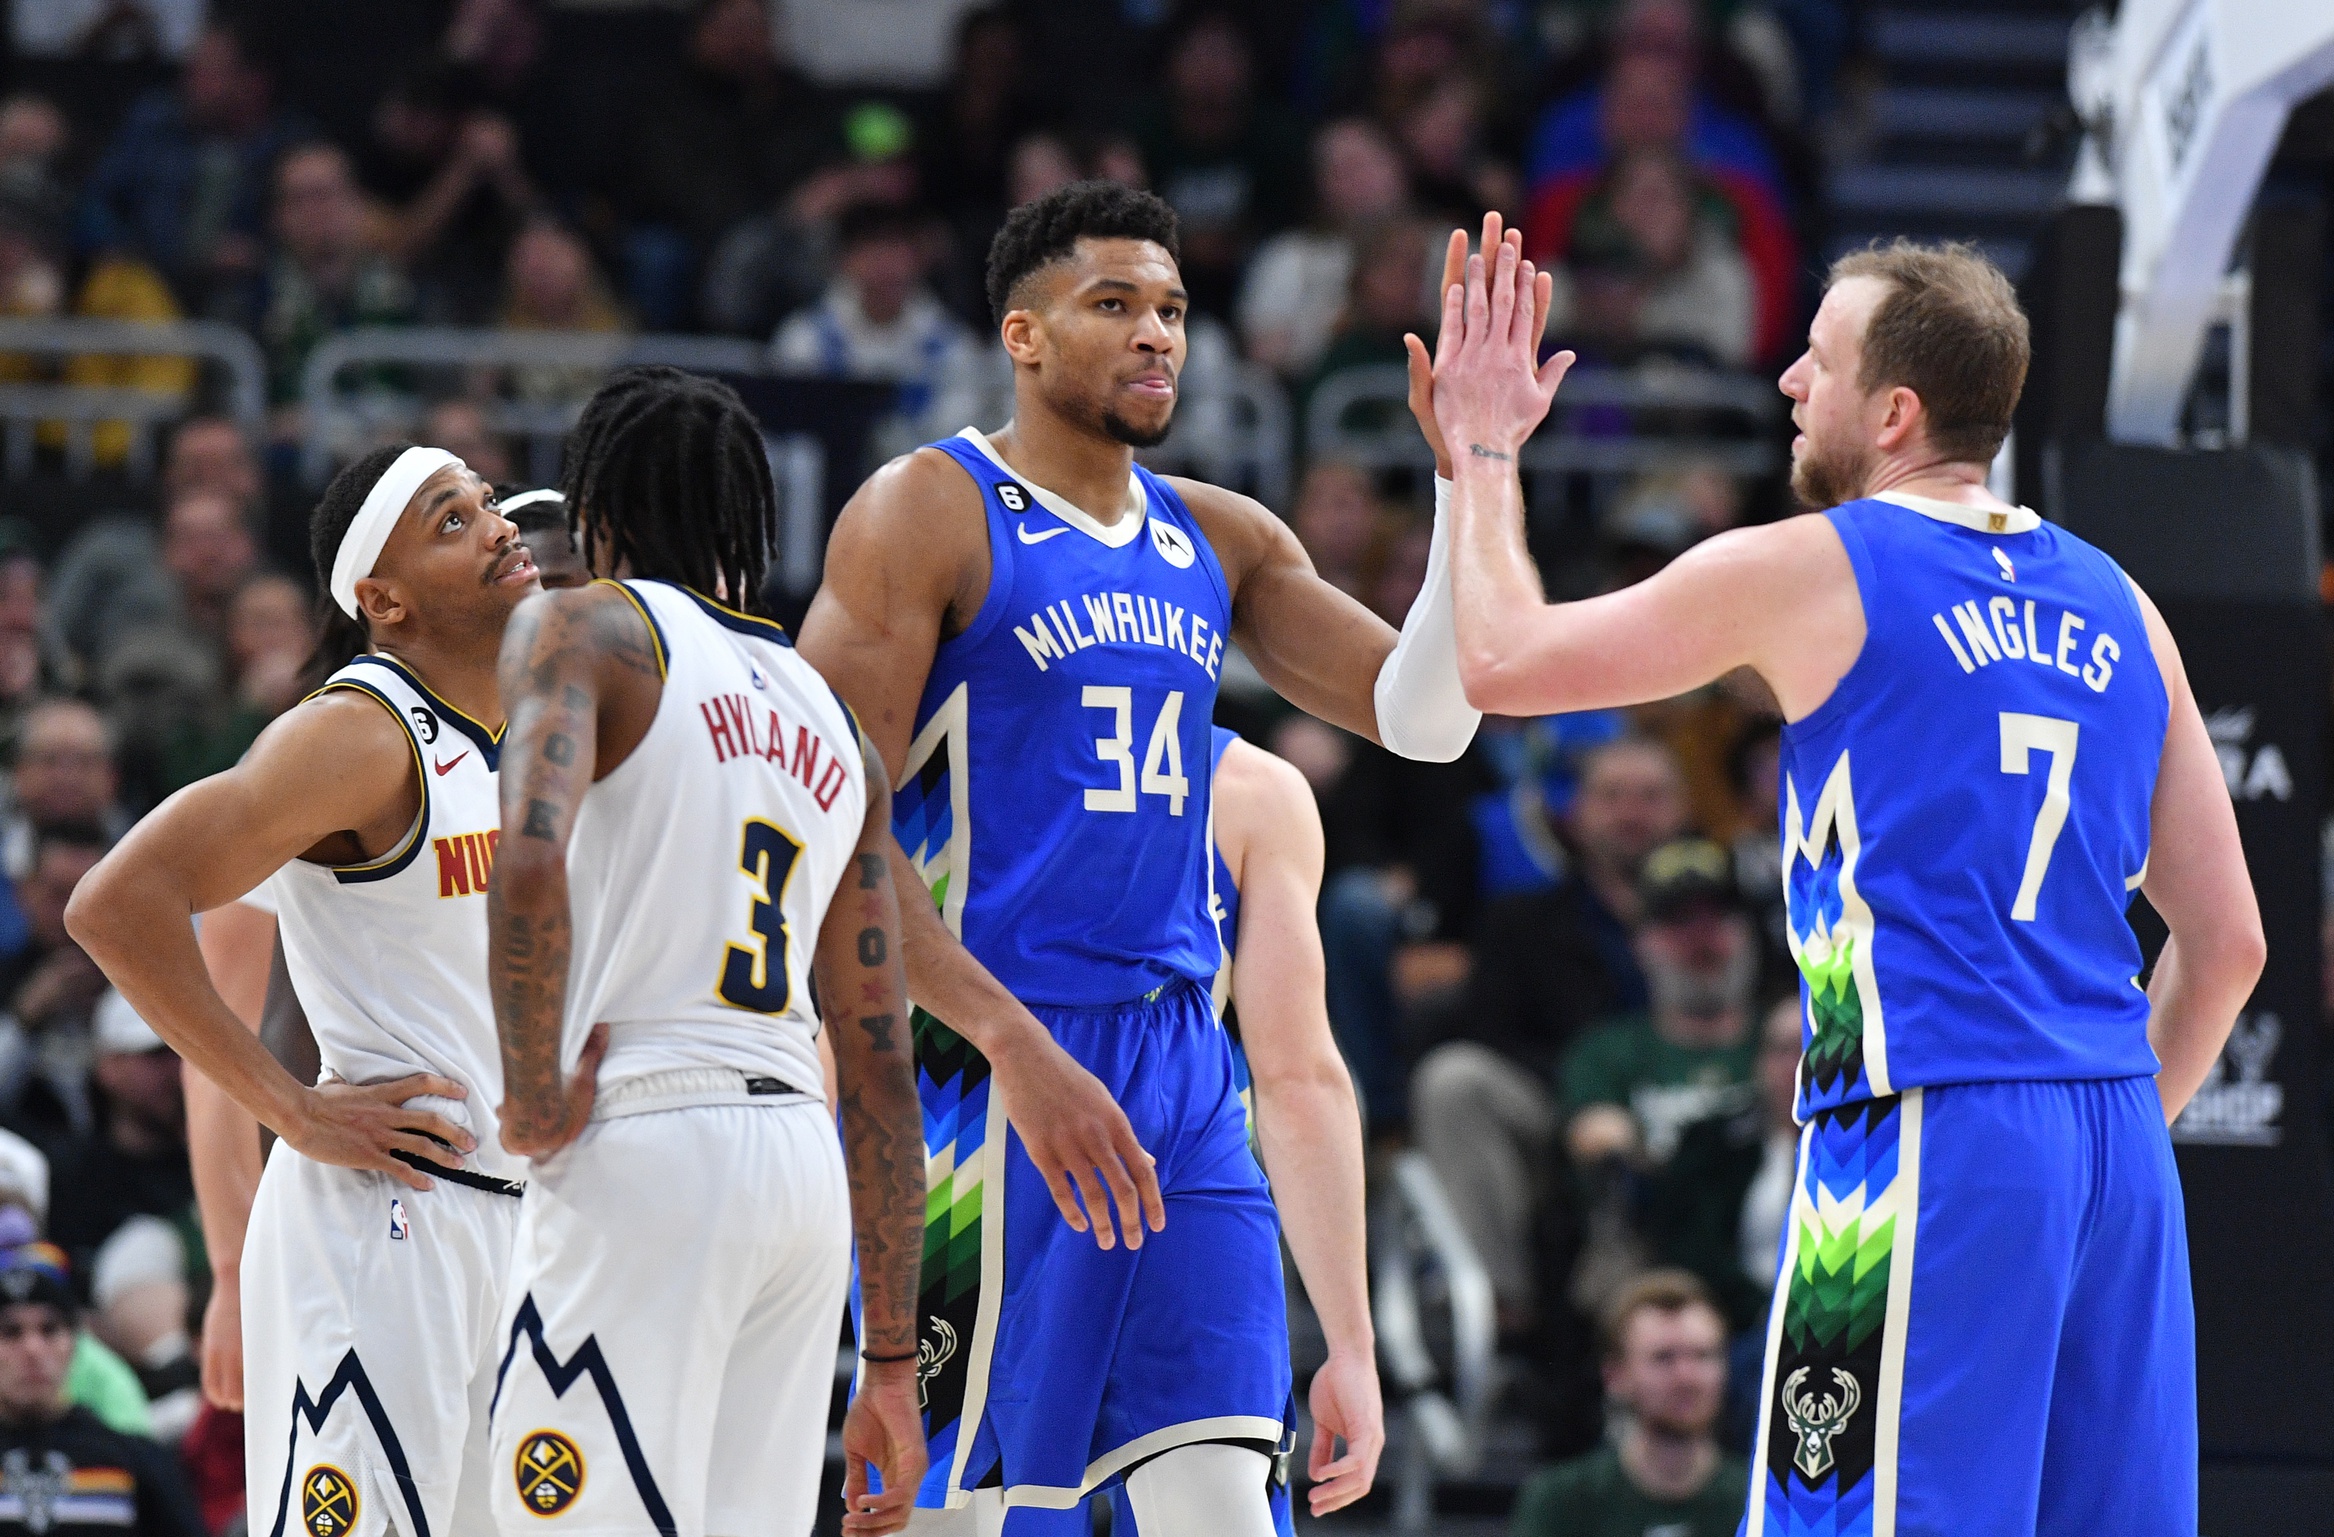 Giannis Antetokounmpo’s monster double-double lifts the Milwaukee Bucks over the Denver Nuggets